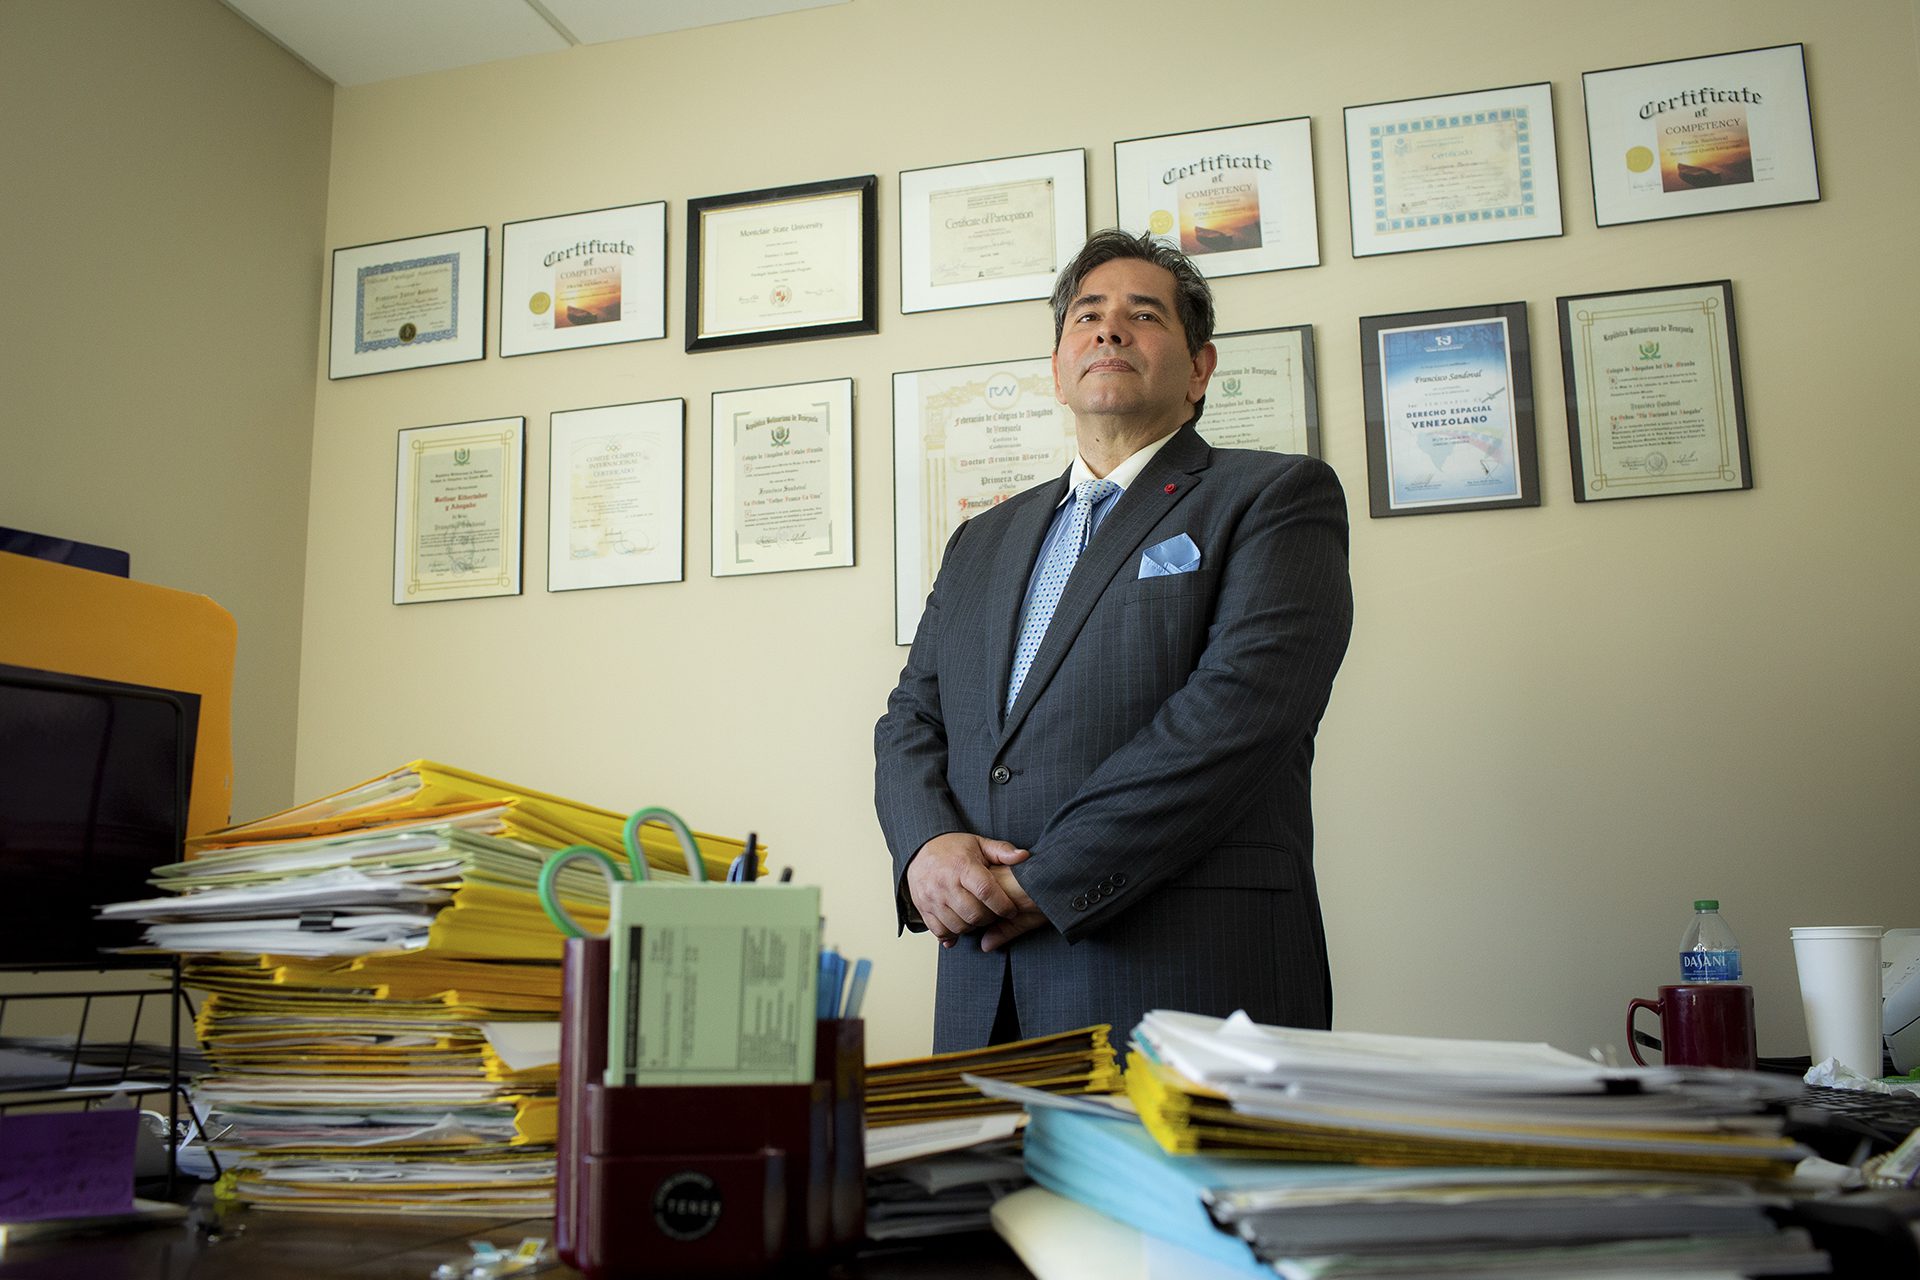 Frank Sandoval wearing a gray jacket and blue dot tie in front of various framed awards and certificates in his office